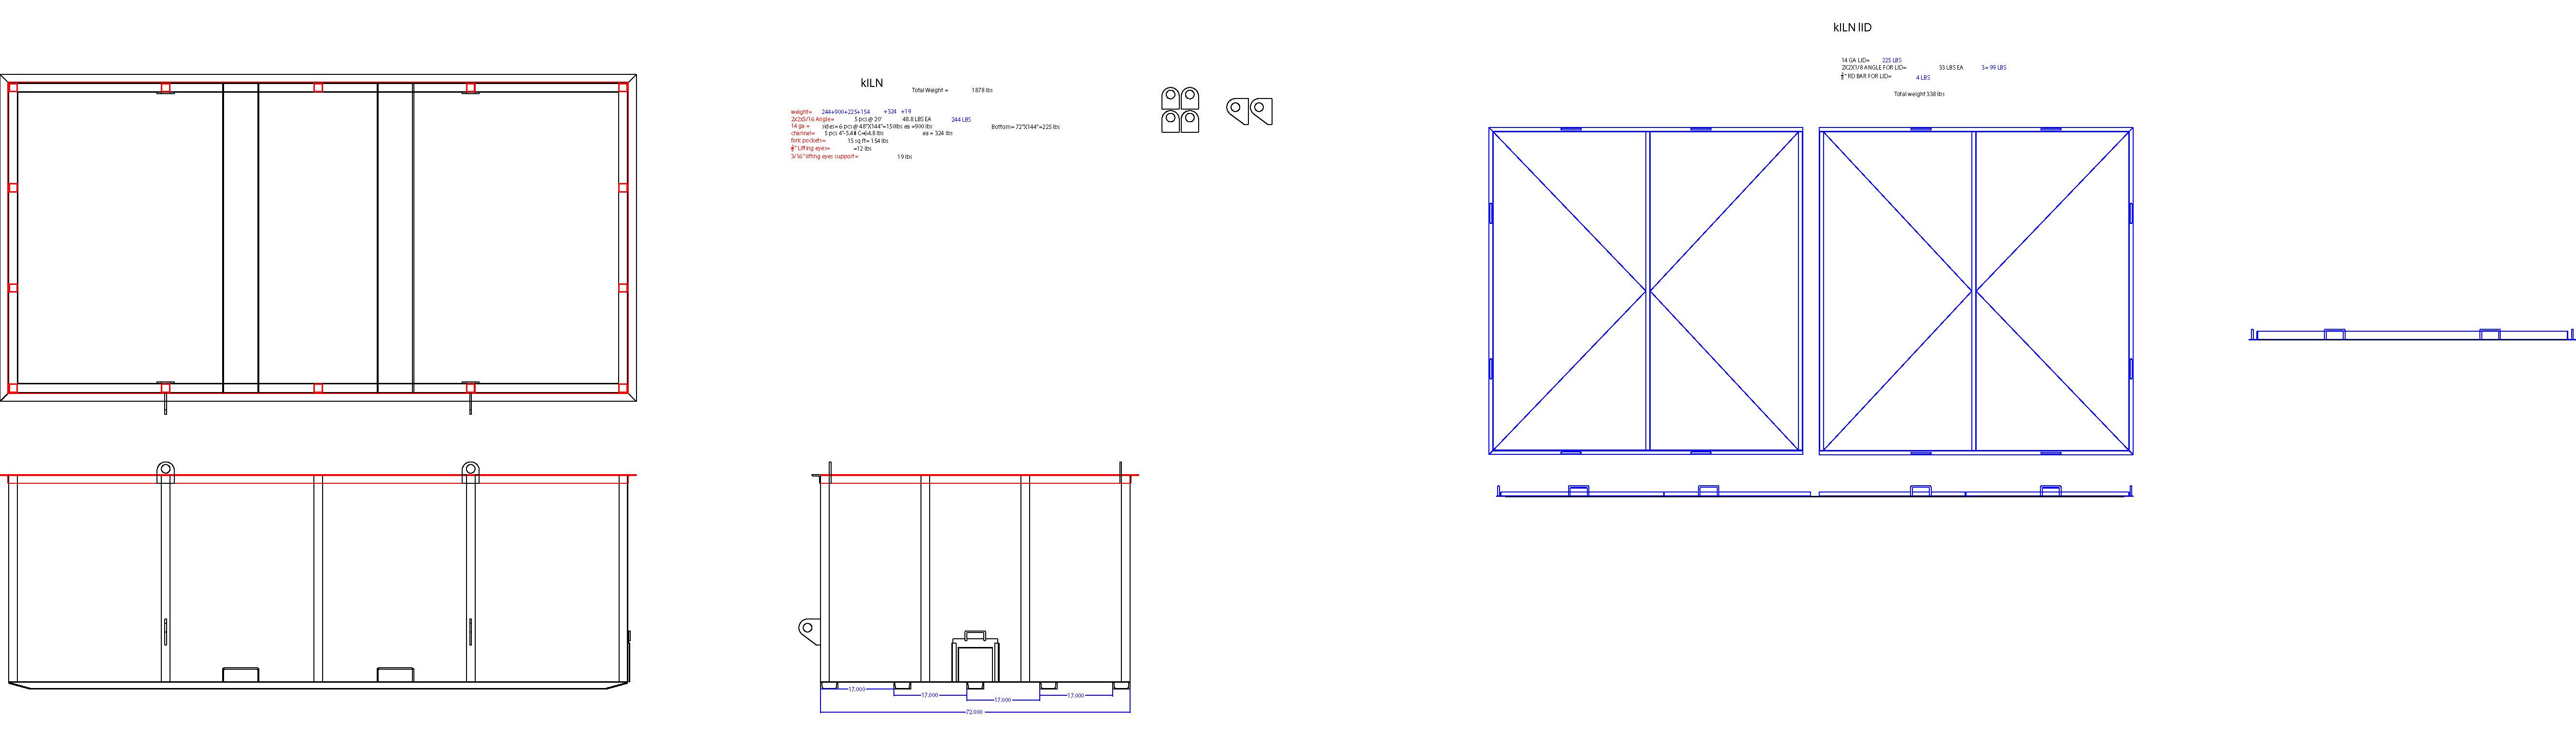 Design plans for a double walled kiln